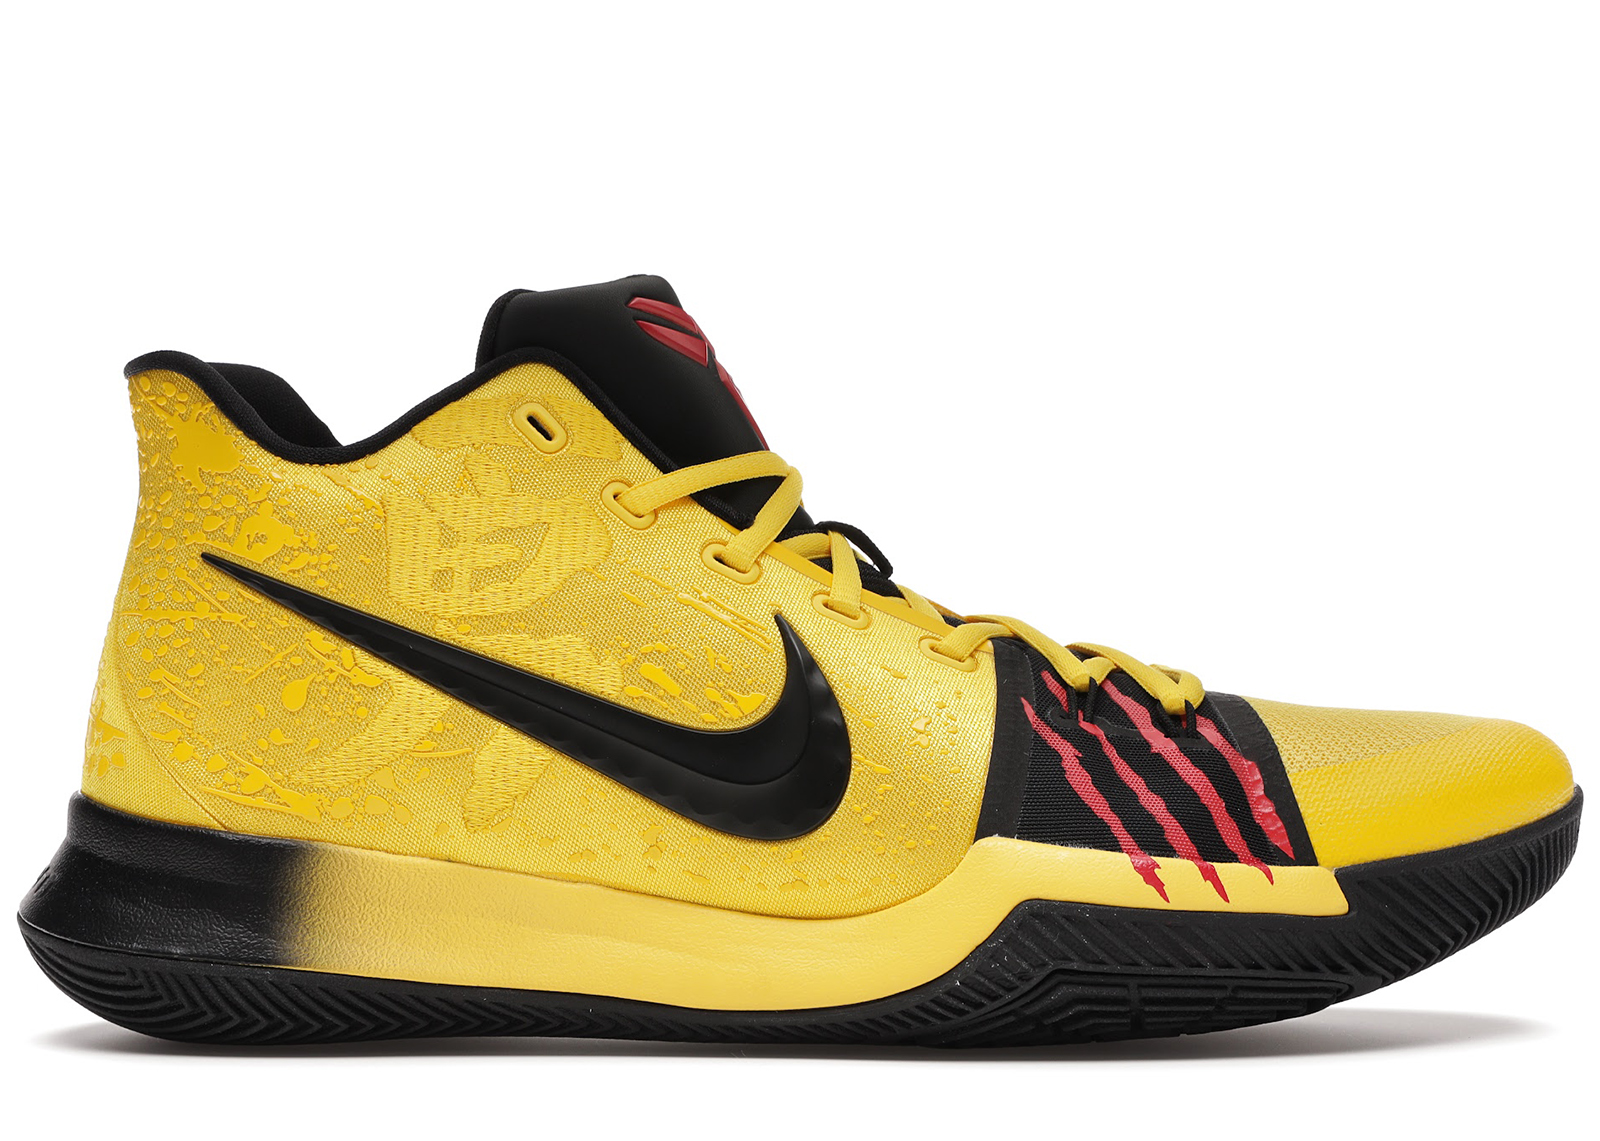 kyrie irving shoes mamba